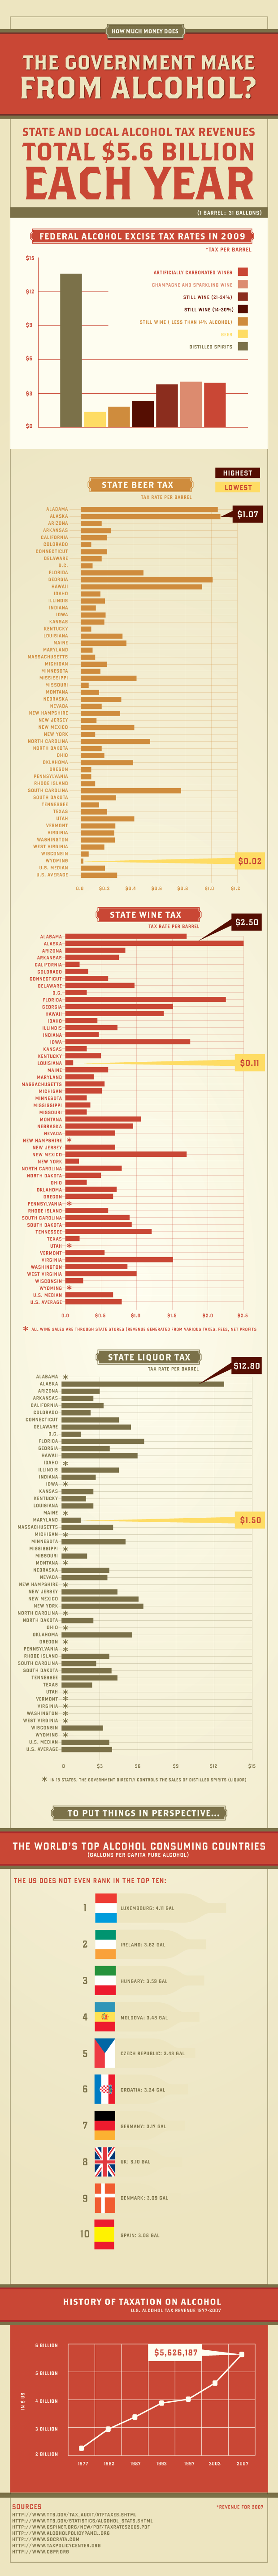 How Much Money Does The Gov’t Make On Alcohol